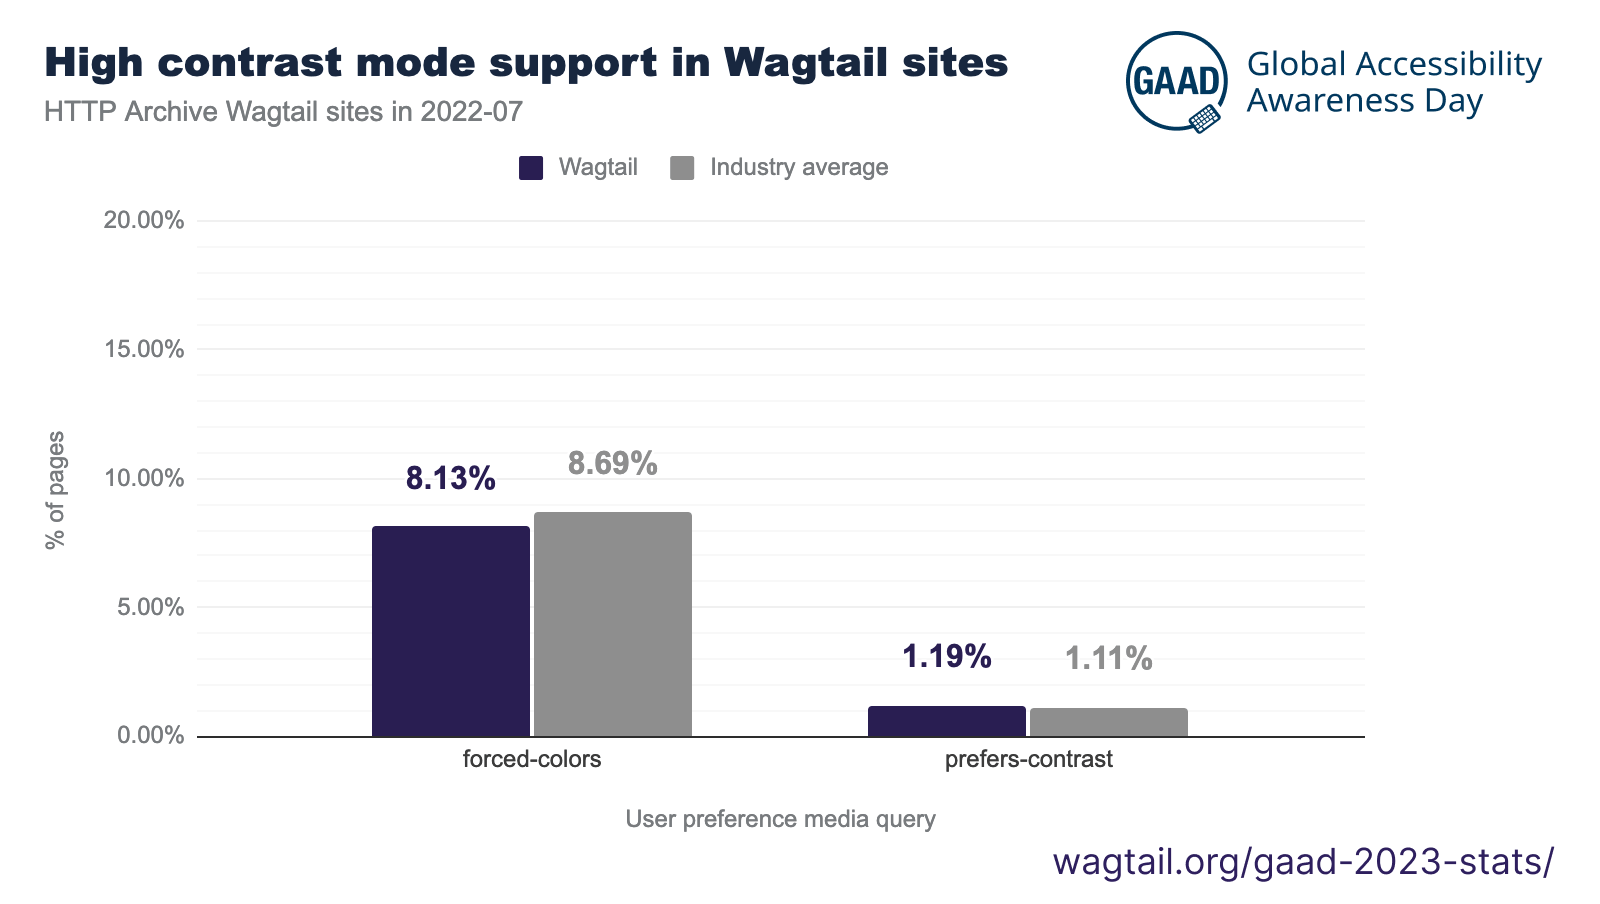 High contrast mode support in Wagtail sites - HTTP Archive Wagtail sites in 2022-07 - GAAD 2023